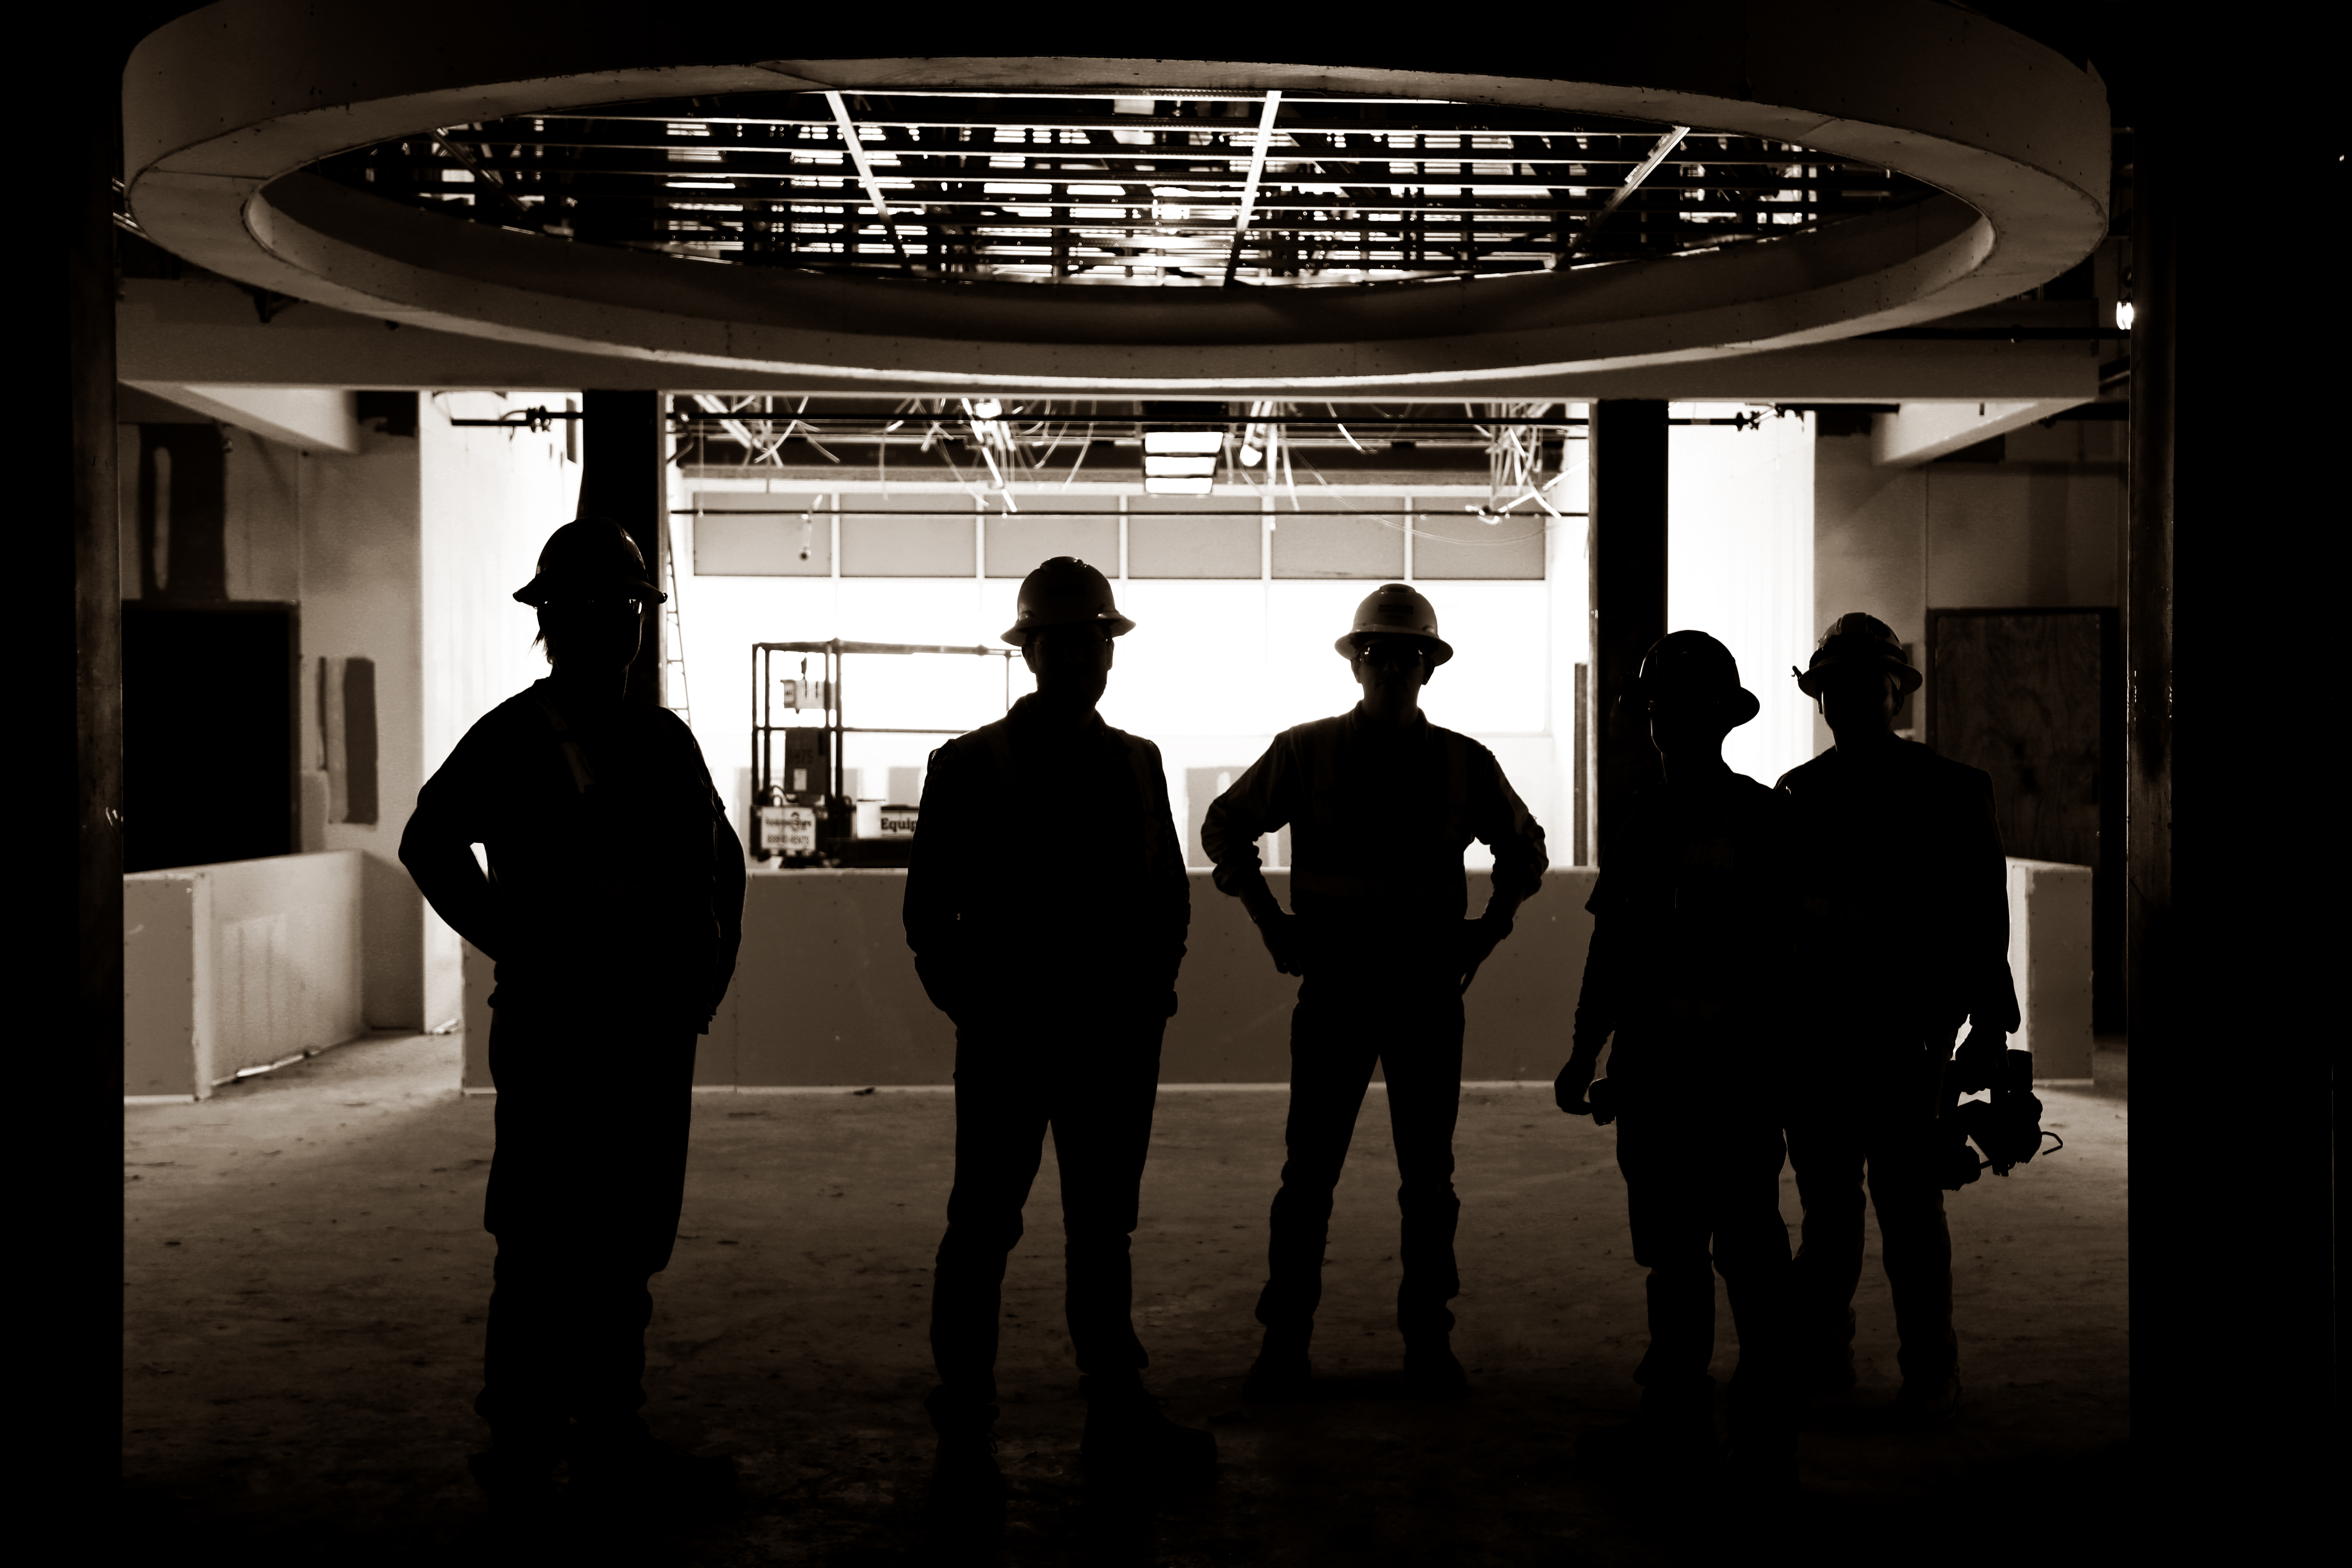 construction crew standing in a dark area in a building under construction